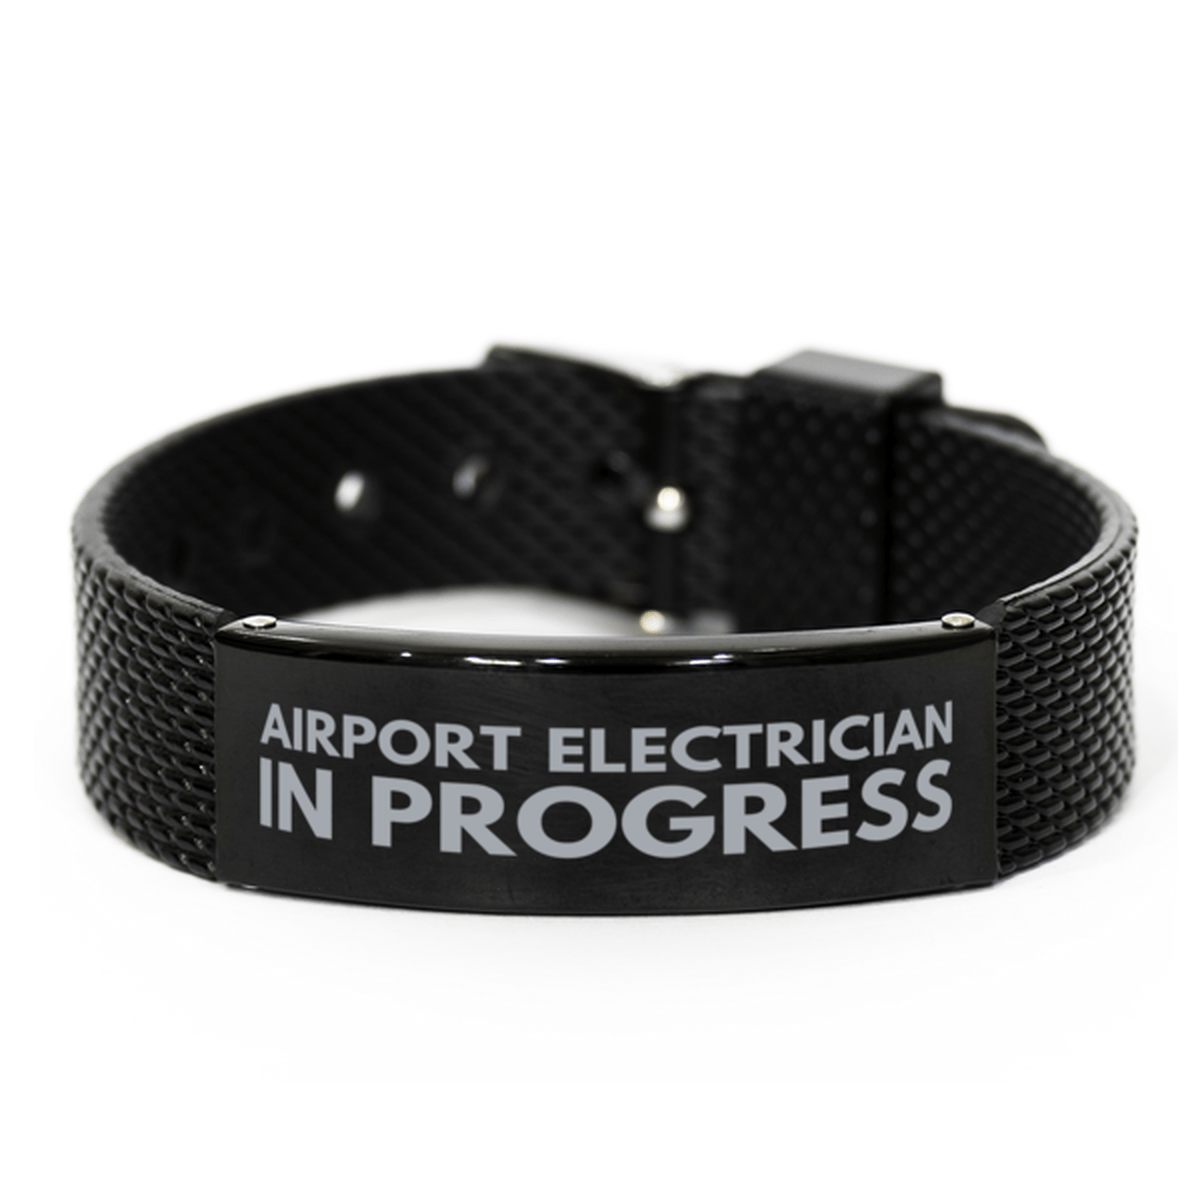 Inspirational Airport Electrician Black Shark Mesh Bracelet, Airport Electrician In Progress, Best Graduation Gifts for Students